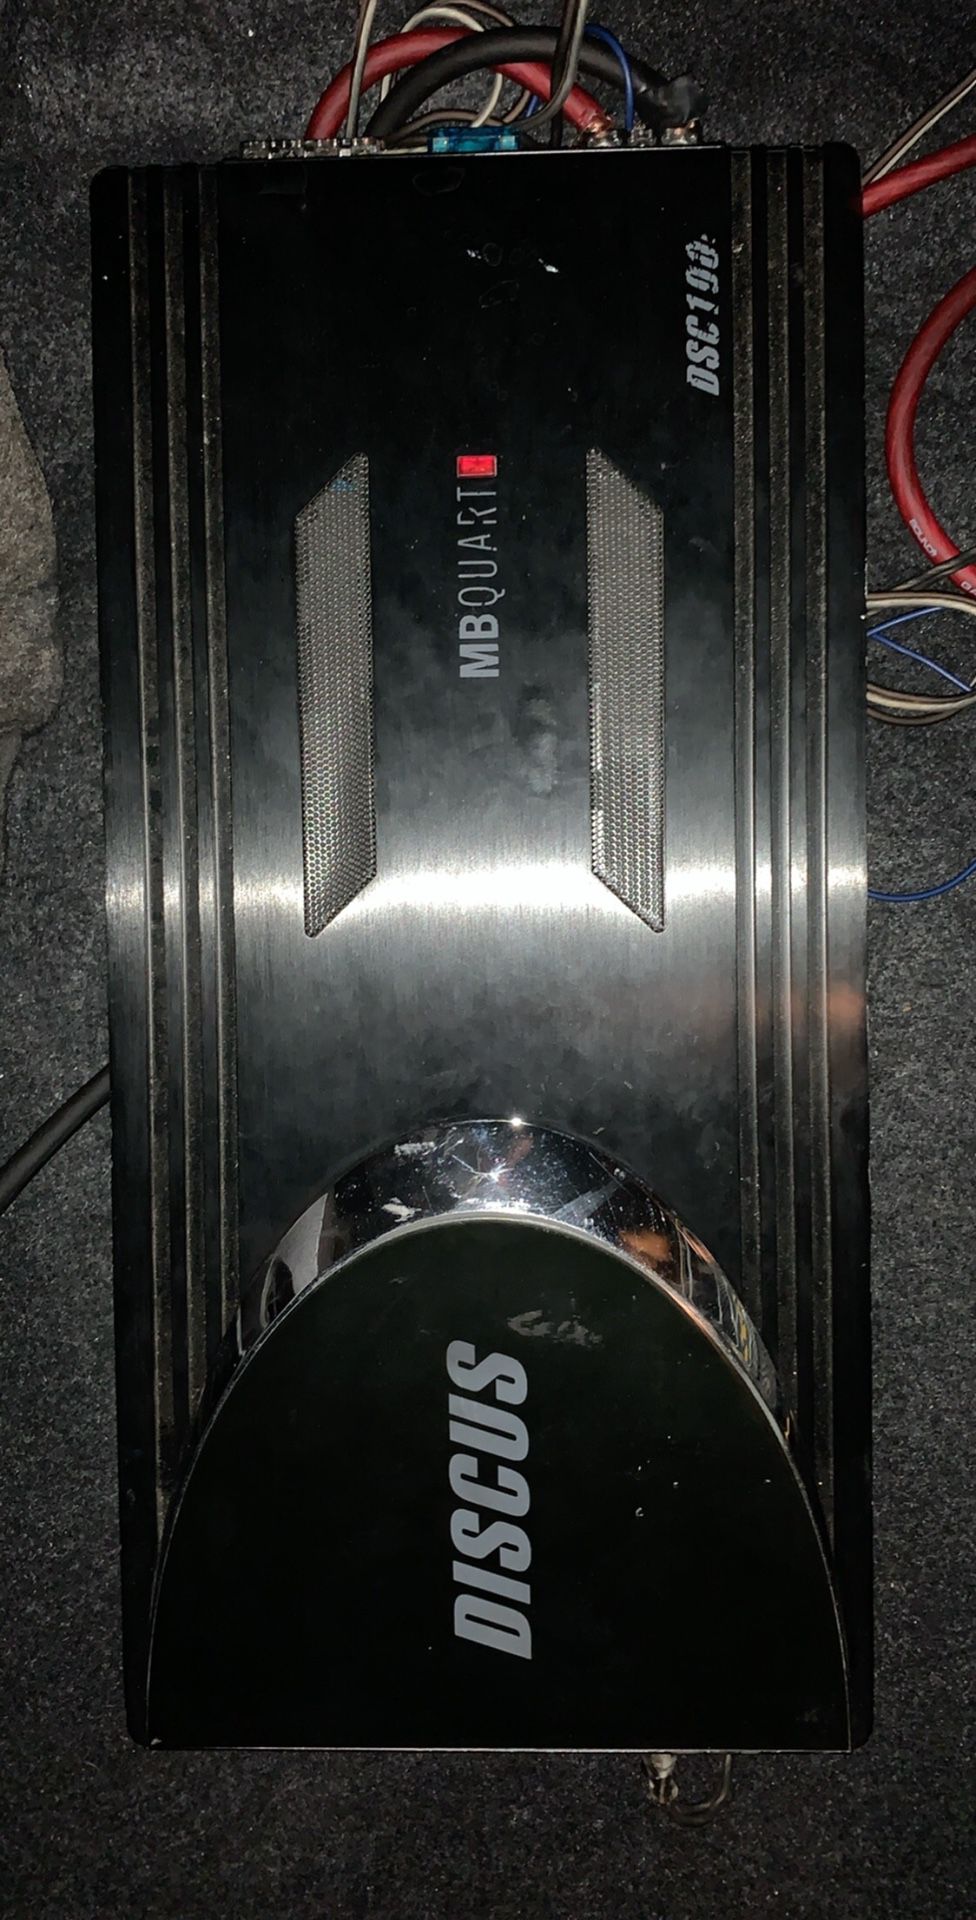 Discus amp and subwoofer